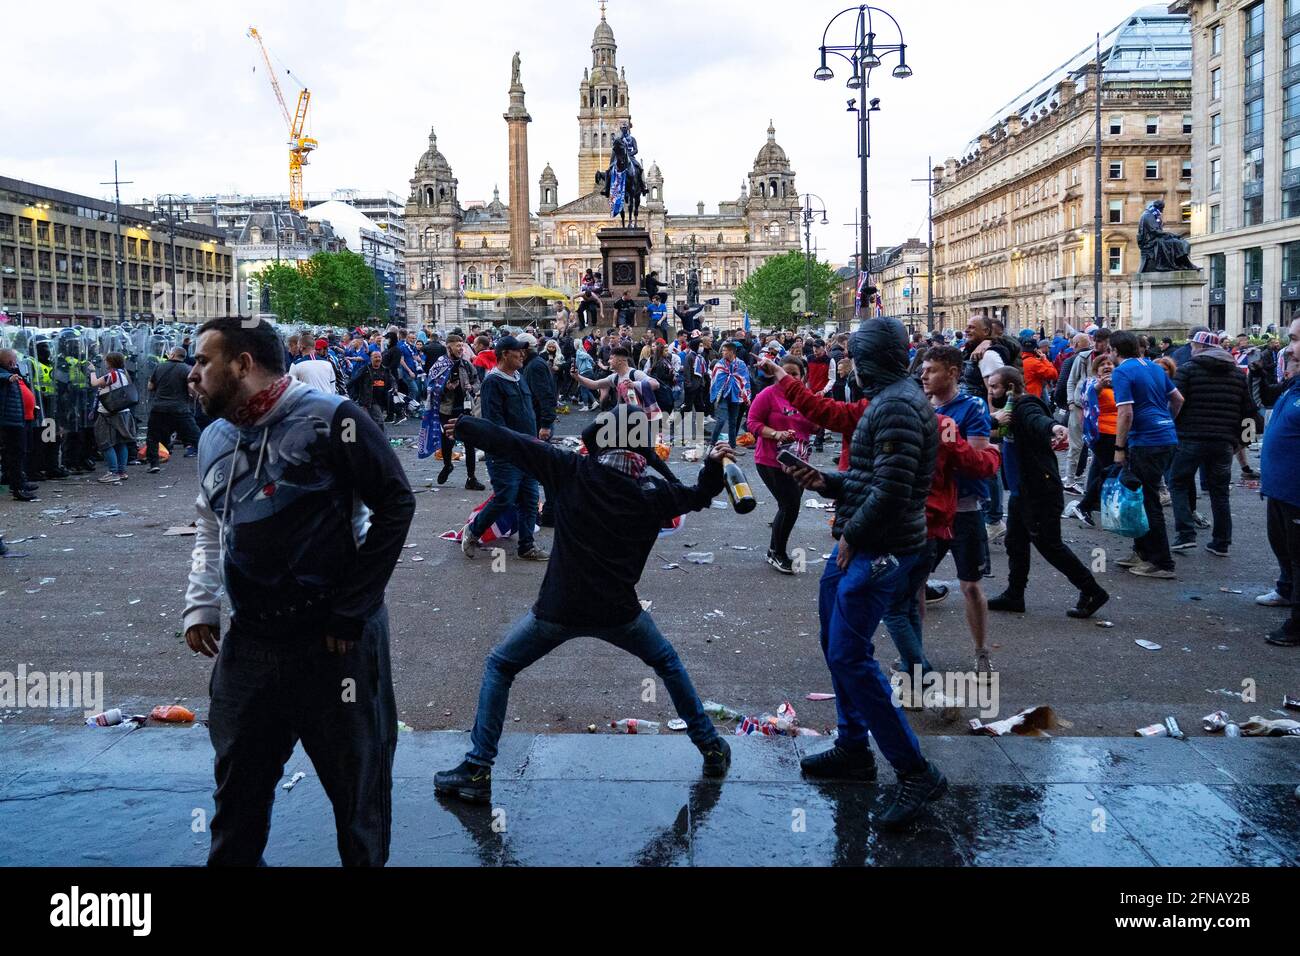 Glasgow, Scotland, UK. 15 May 202. Rangers football supporters  celebrating 55th league victory are cleared from George Square by police in riot gear on Saturday evening. In very violent scenes police were pelted with bottles and items from a nearby construction site as police pushed the supporters into the south west corner of the square. Pic; Man throws bottle towards police line.  Iain Masterton/Alamy Live News. Stock Photo